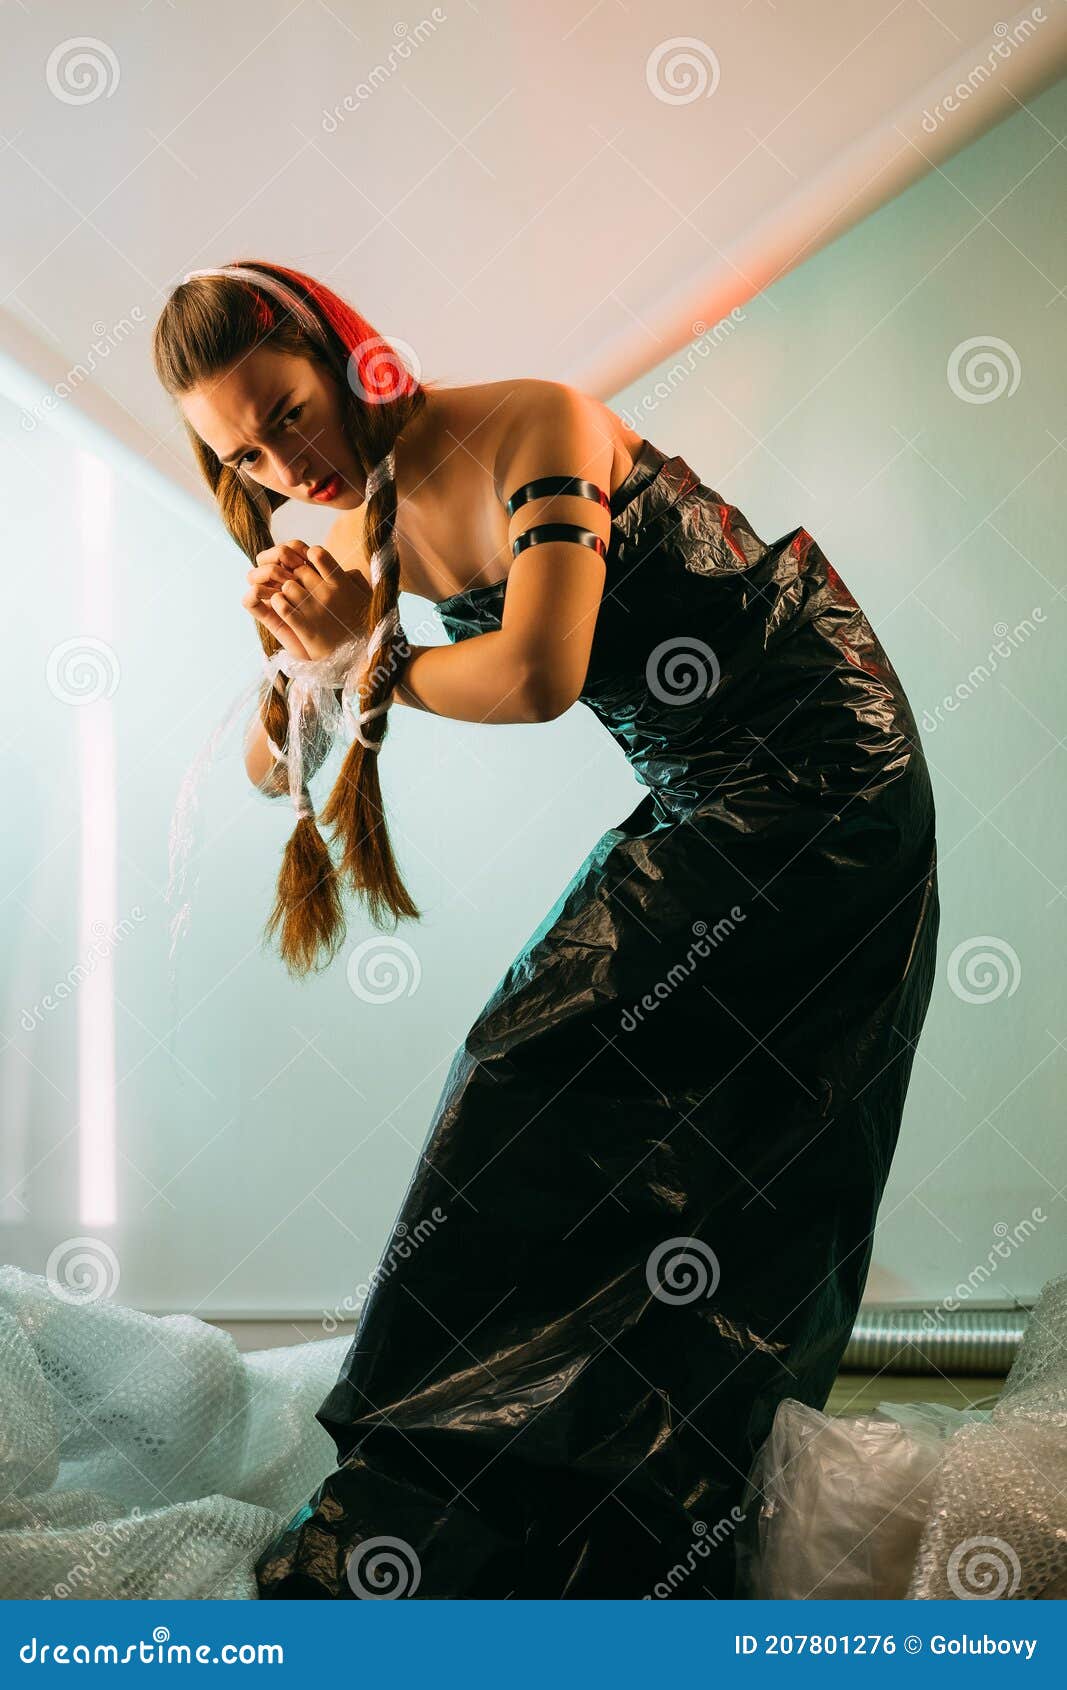 Human Trafficking Forced Labour Enslaved Woman Stock Photo Image Of